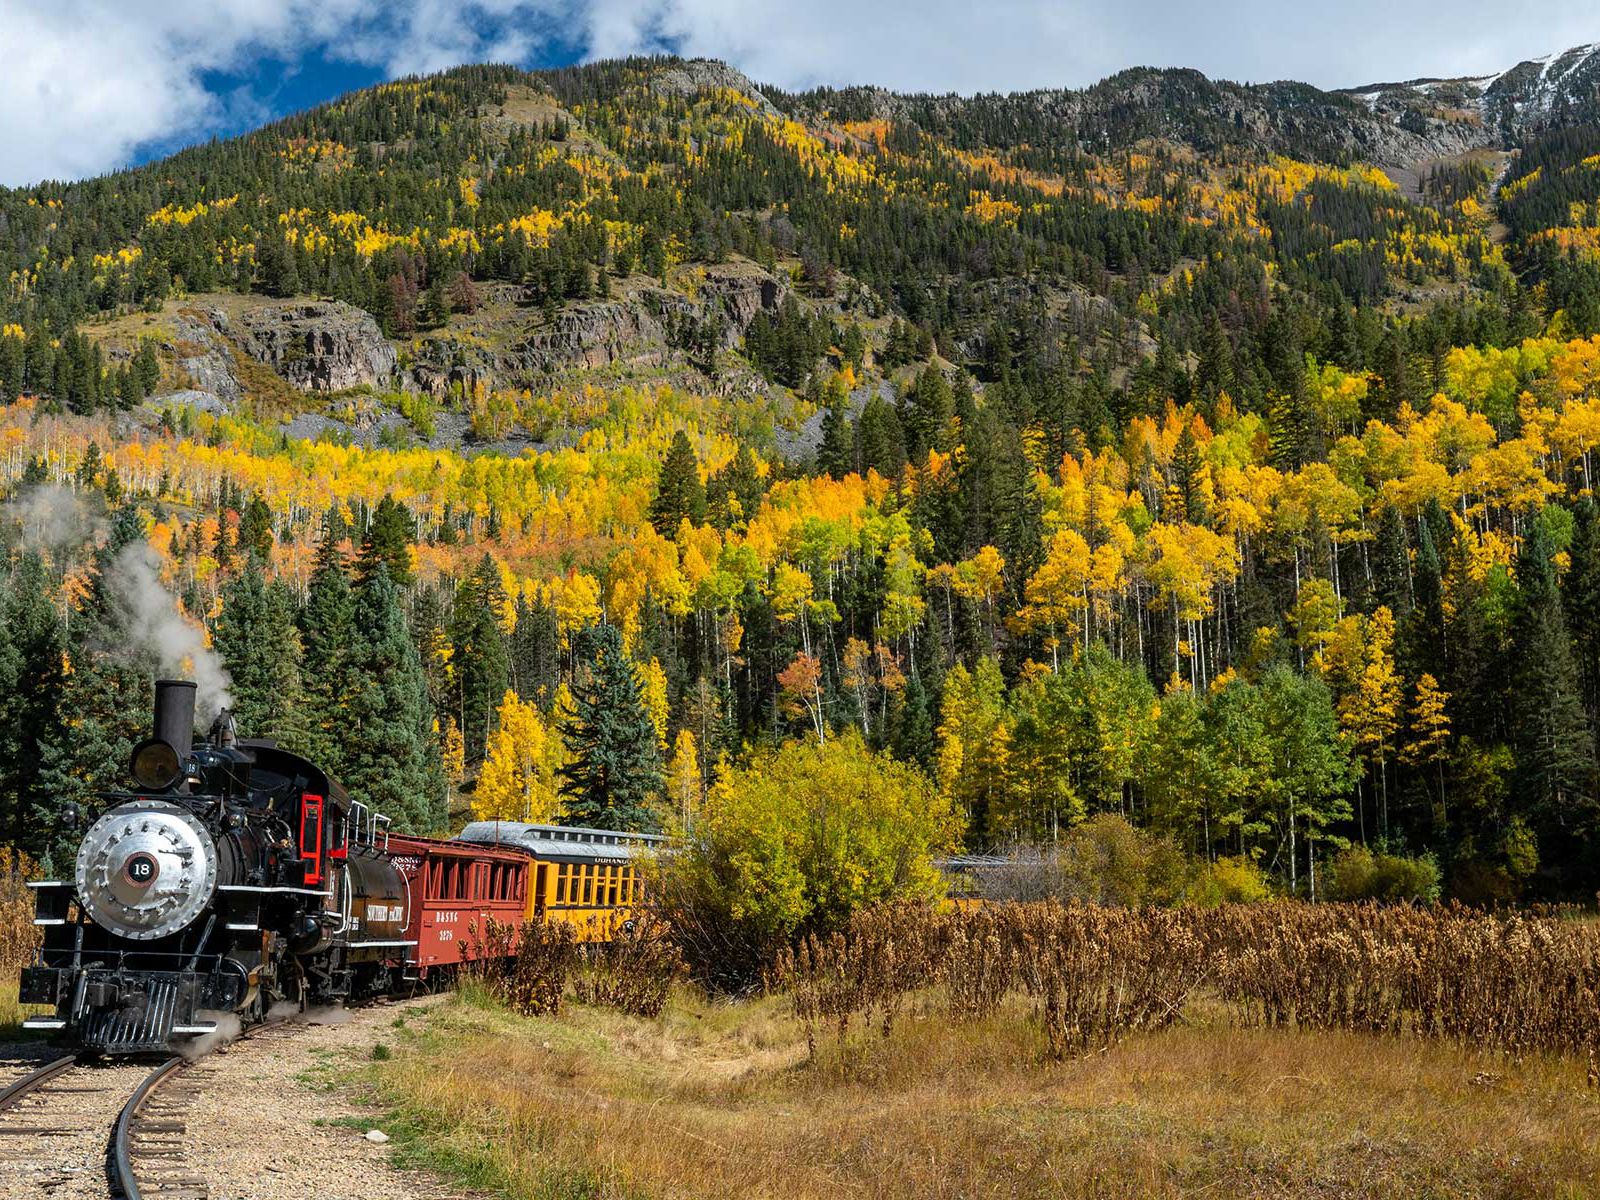 Colorado Trains That Will Take You to Beautiful Mountains, Sparkling Rivers, and Golden Groves